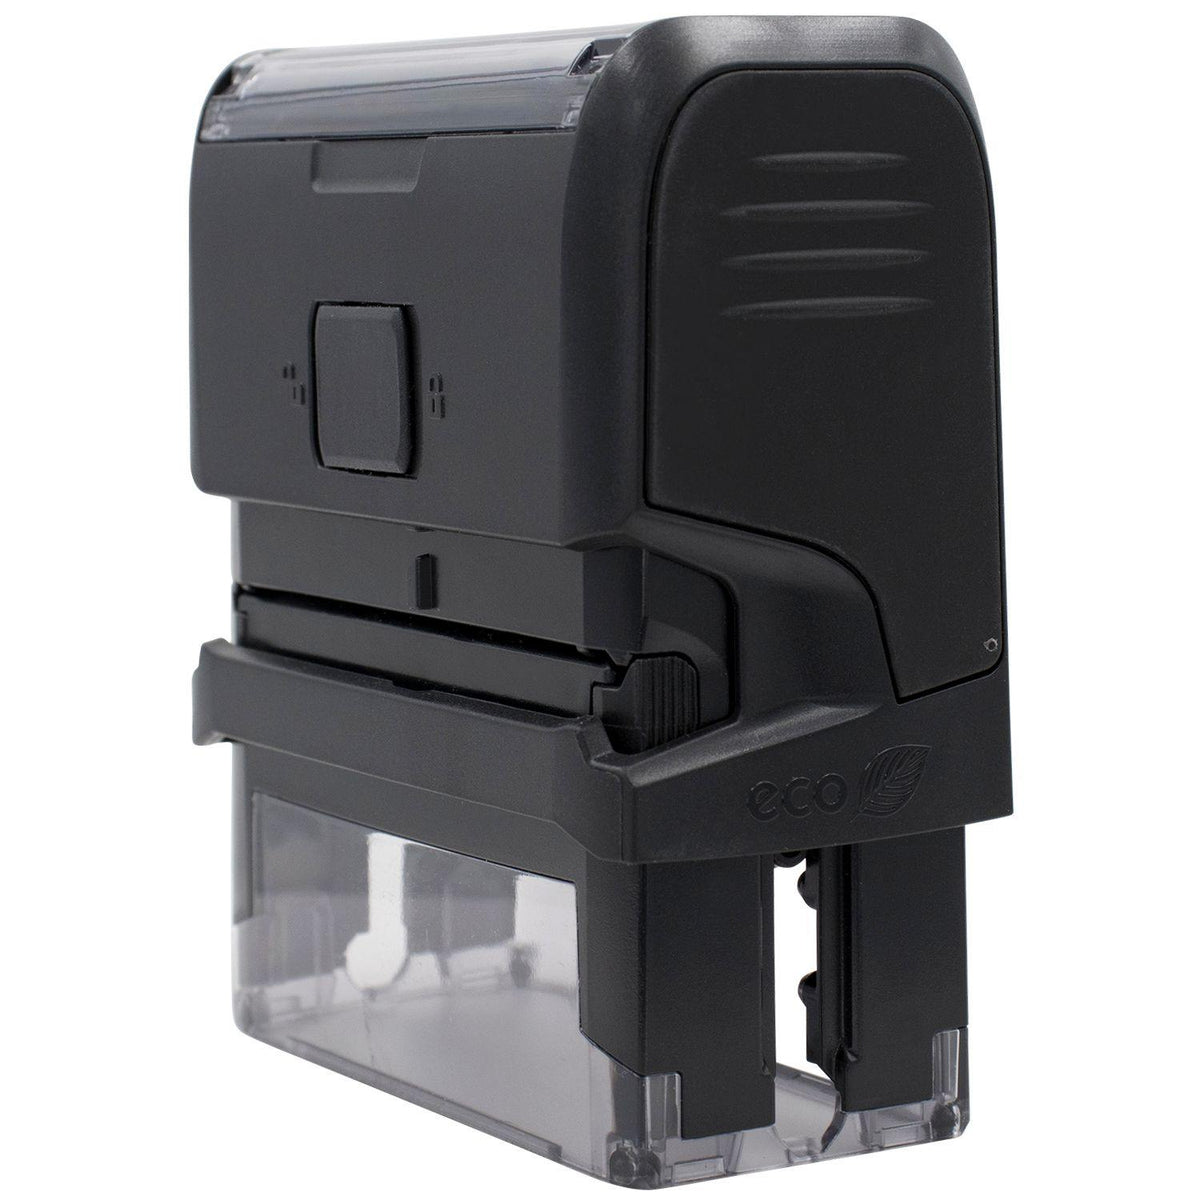 Large Self Inking Credit Report Stamp - Engineer Seal Stamps - Brand_Trodat, Impression Size_Large, Stamp Type_Self-Inking Stamp, Type of Use_Finance